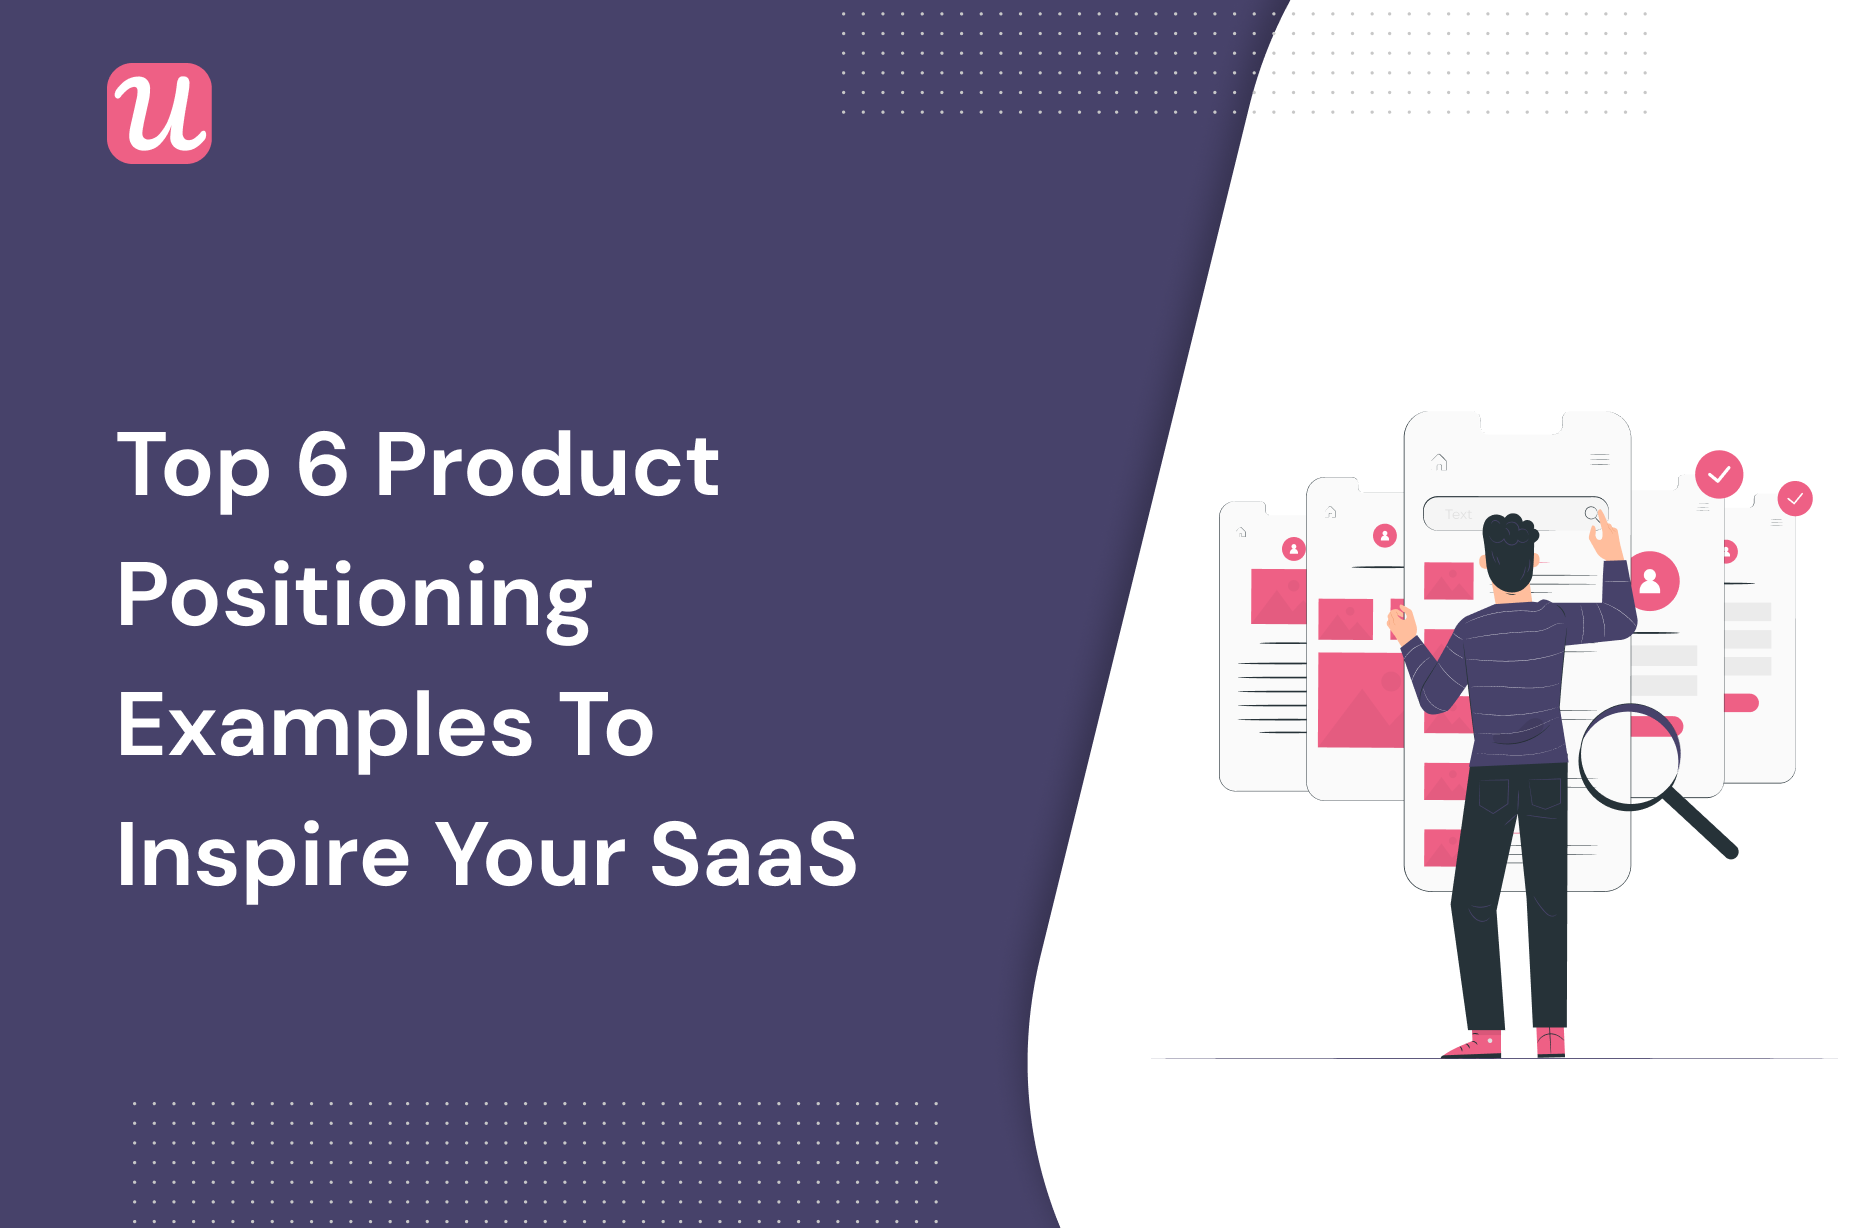 Top 6 Product Positioning Examples to Inspire Your SaaS